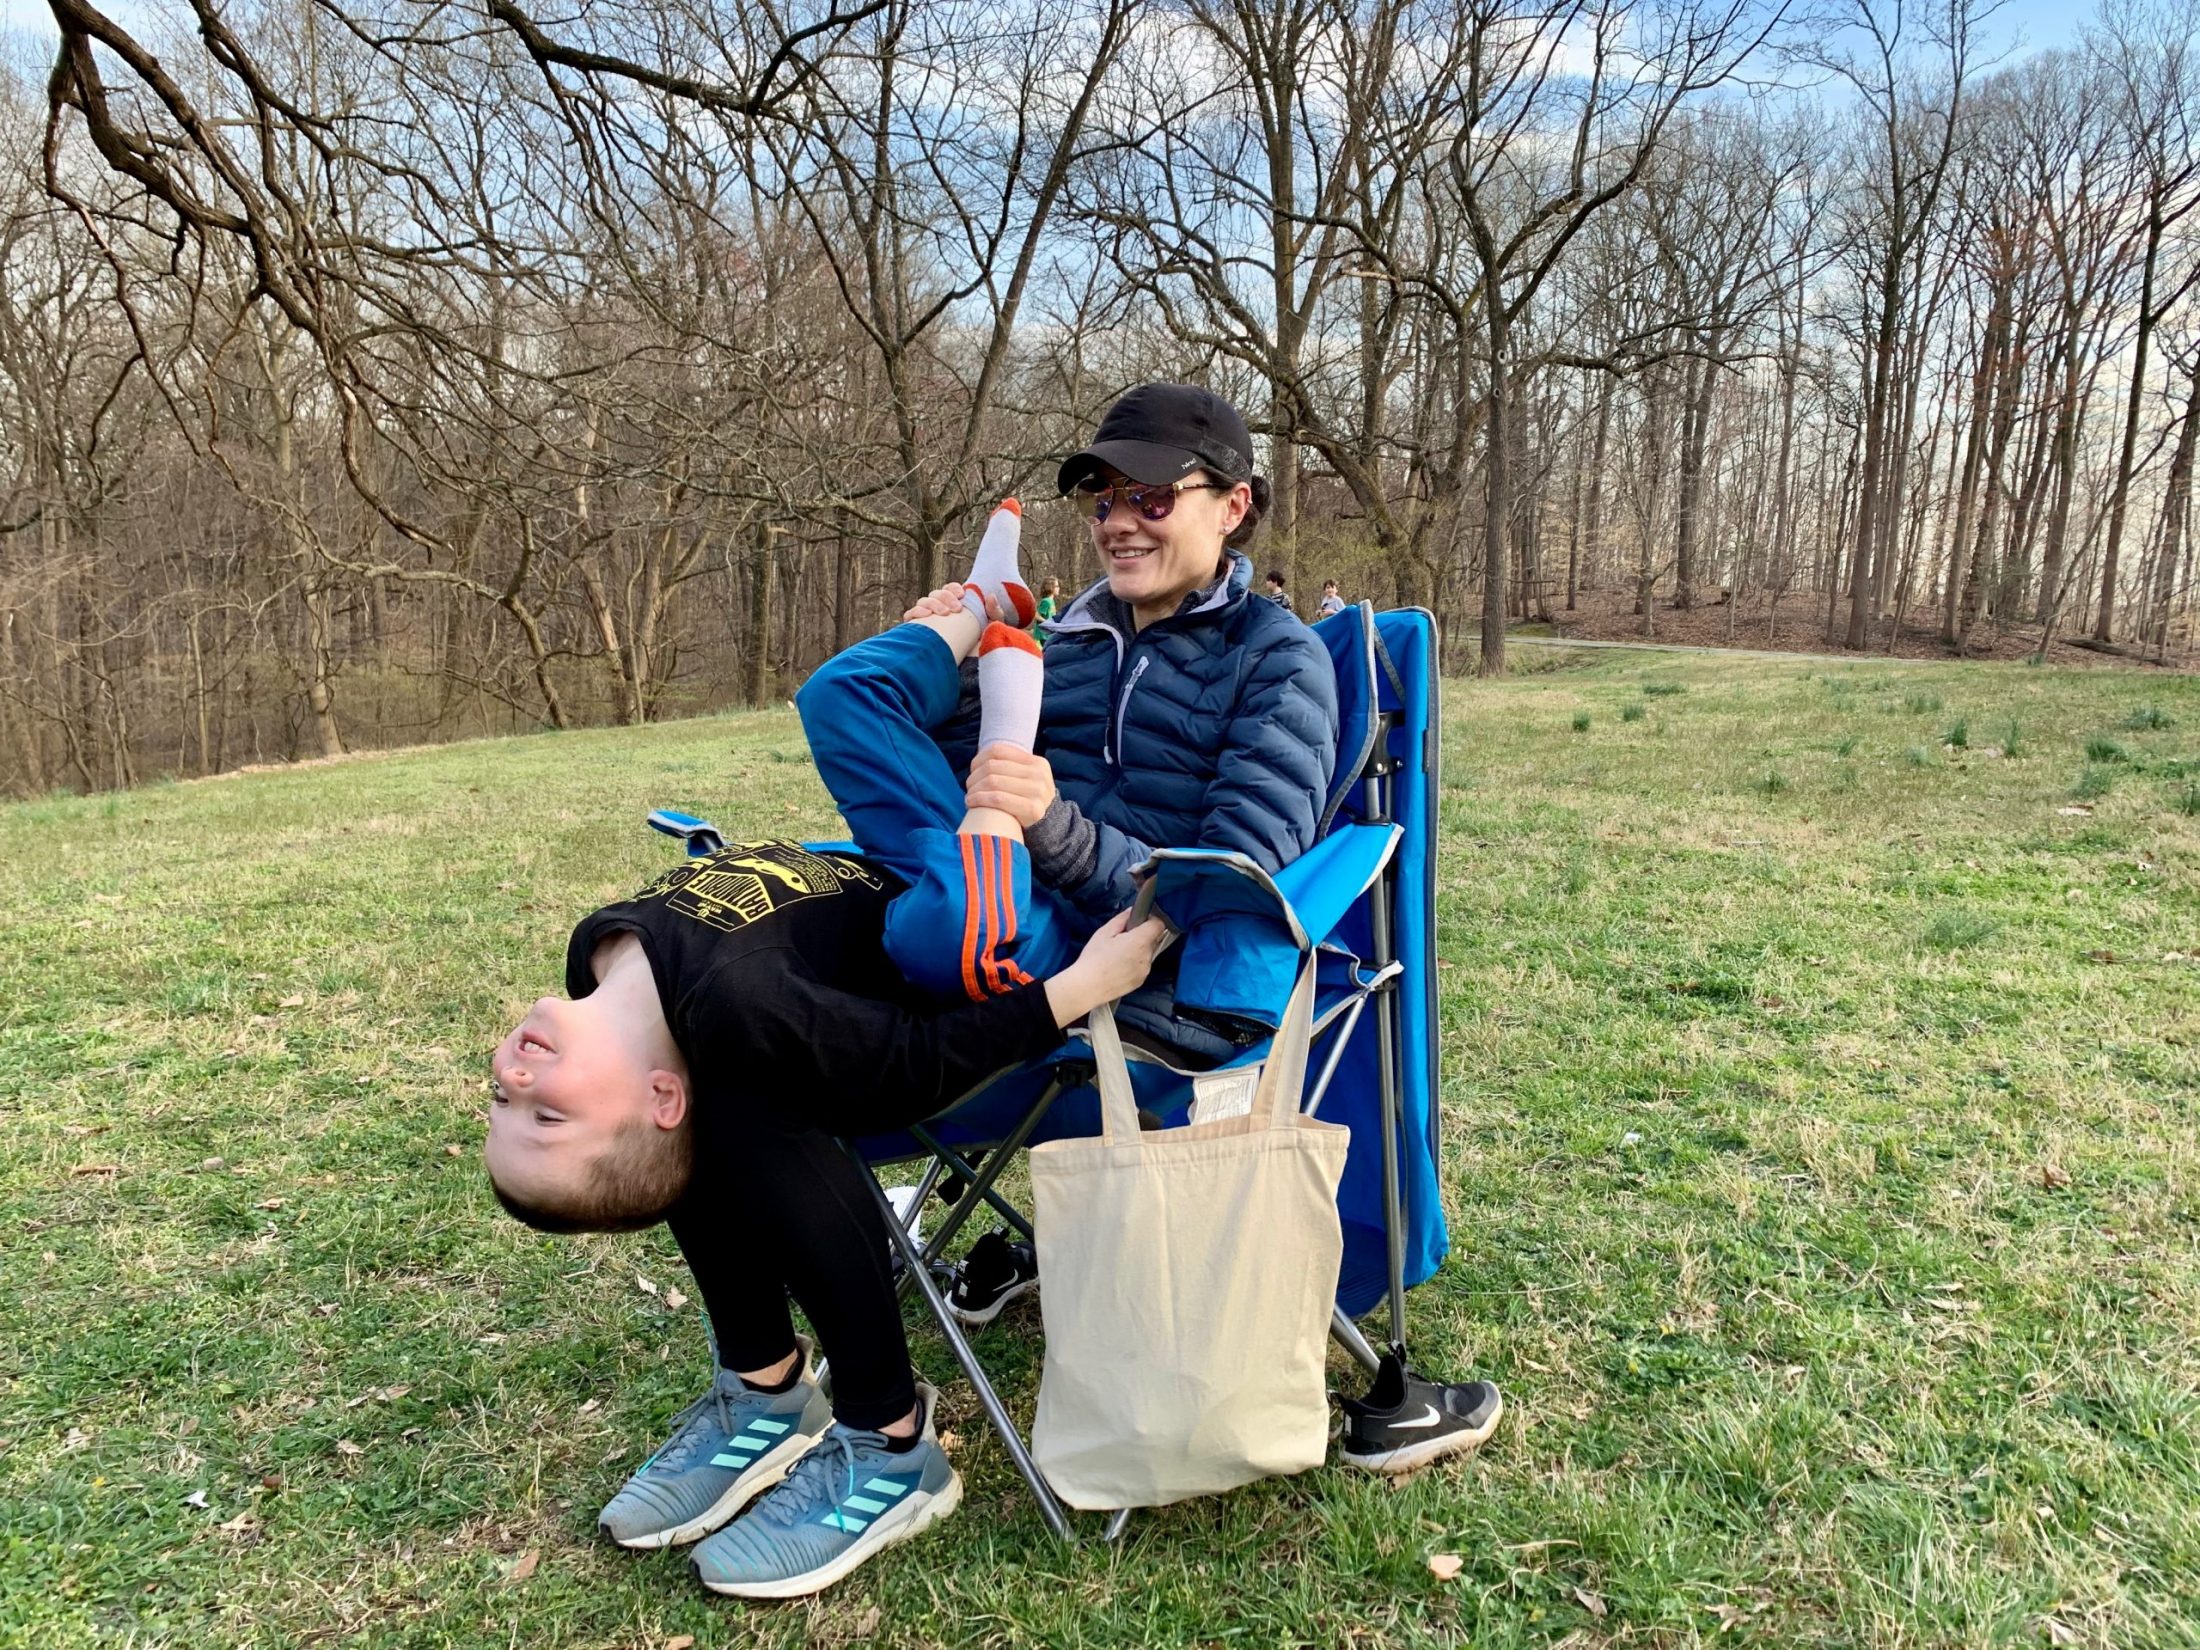 DC widow blog writer Marjorie Brimley plays with son while sitting in a chair at park